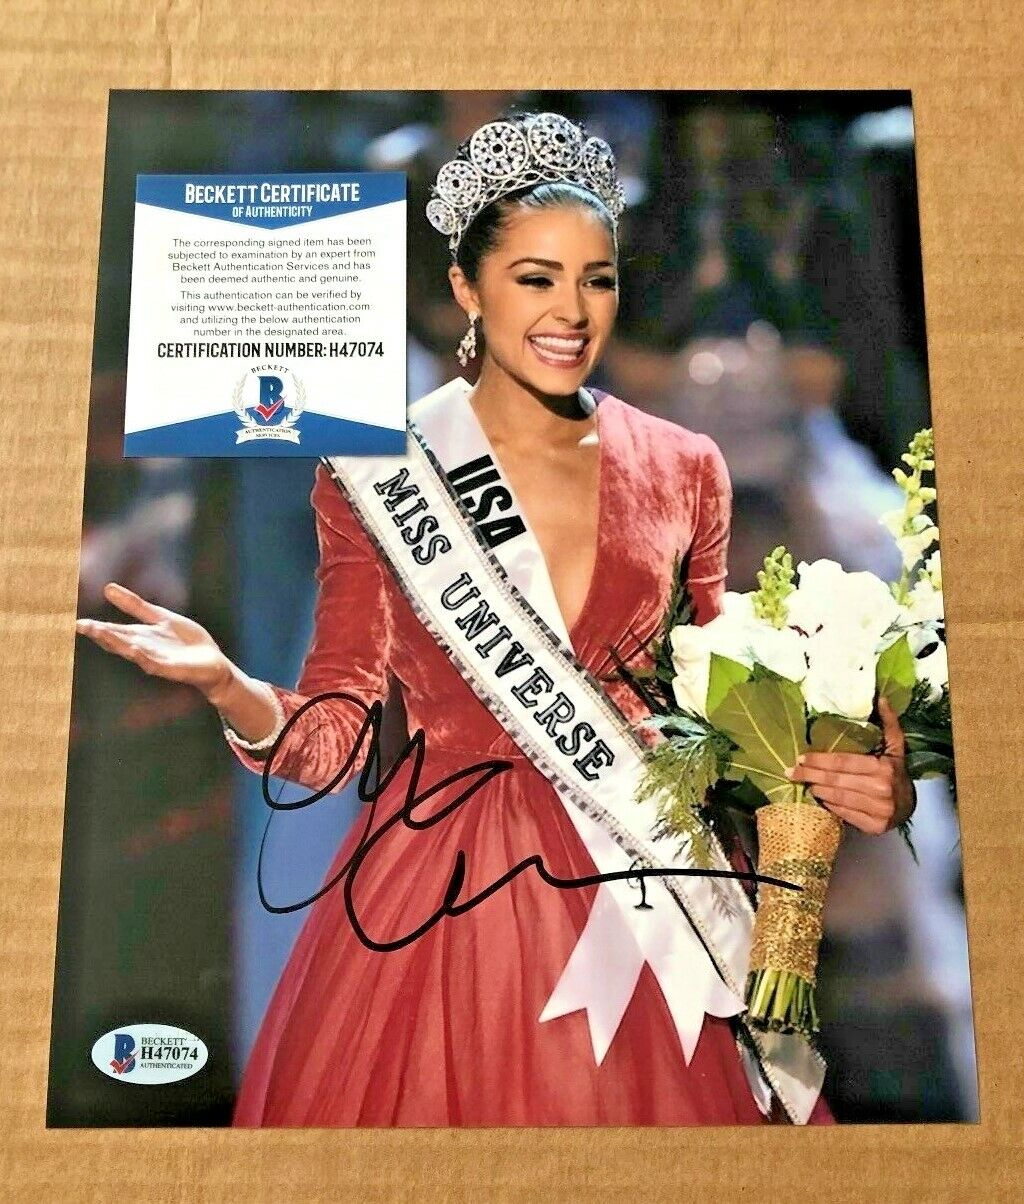 OLIVIA CULPO SIGNED MISS UNIVERSE 8X10 Photo Poster painting BECKETT CERTIFIED